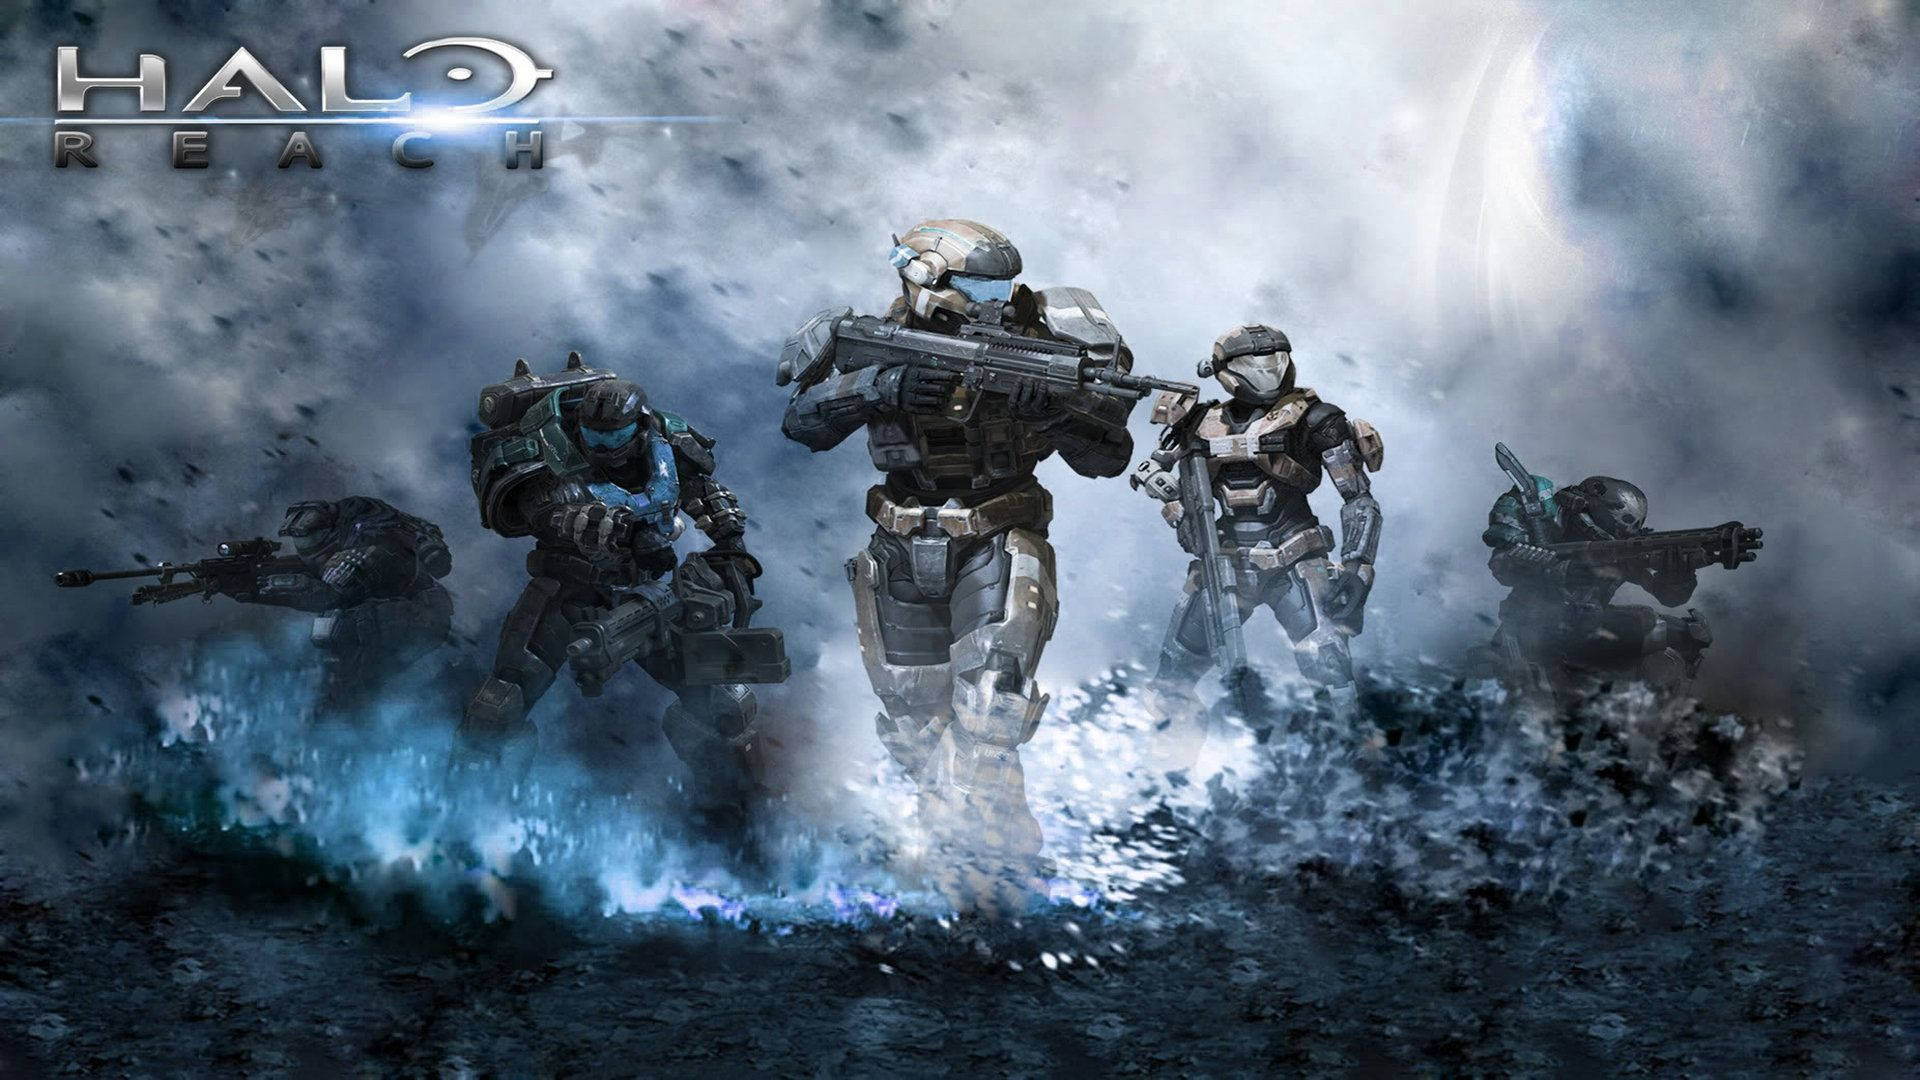 The legendary Spartans of Halo prepare to defend humanity. Wallpaper